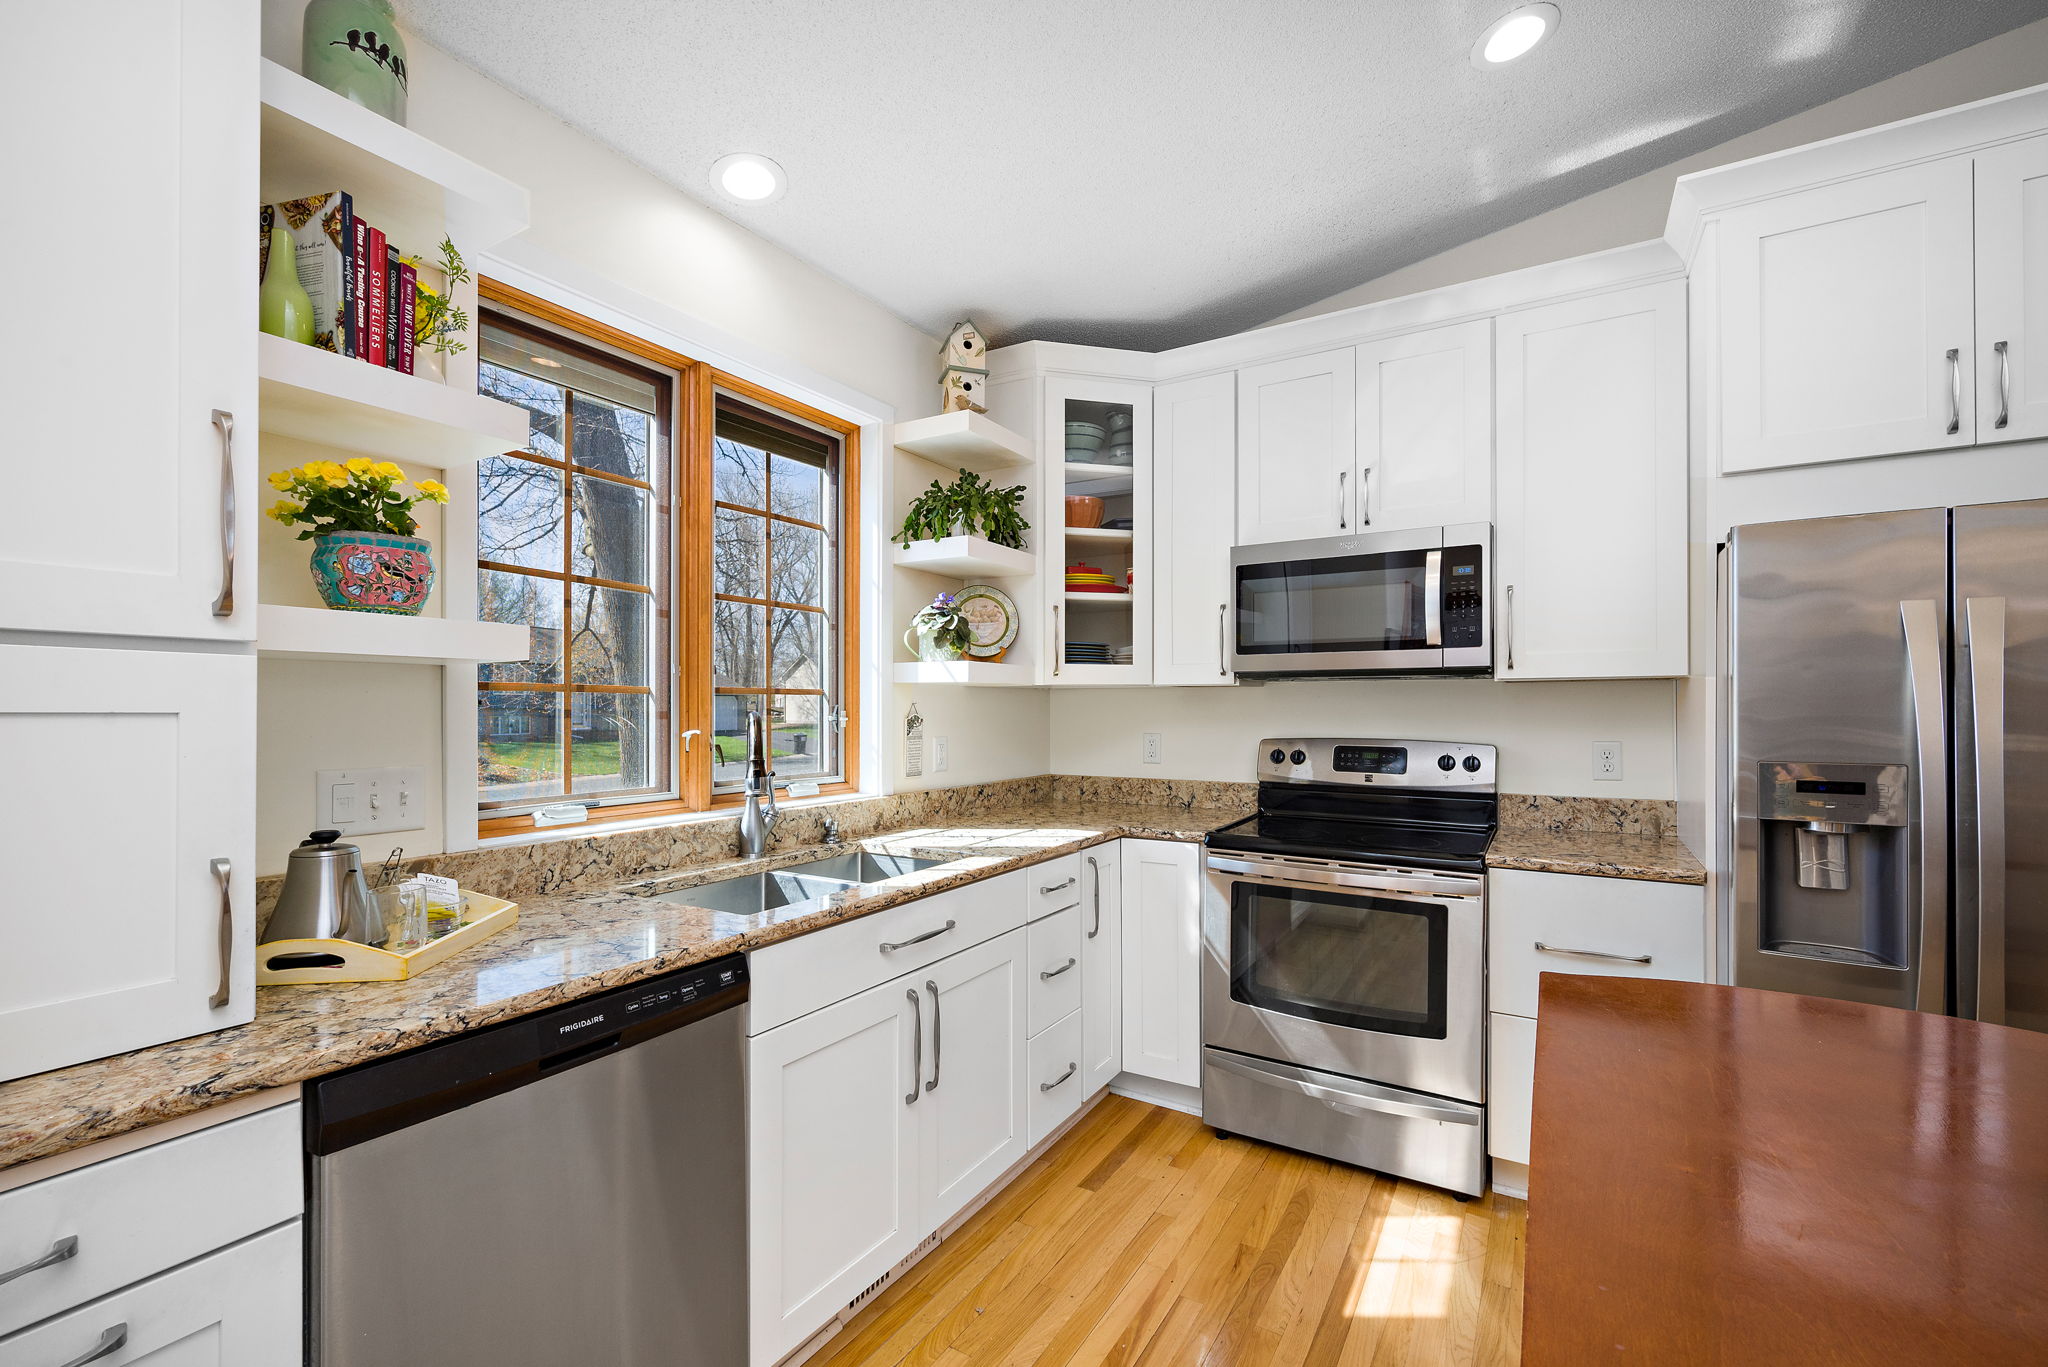 Cambria counter tops and stainless appliances